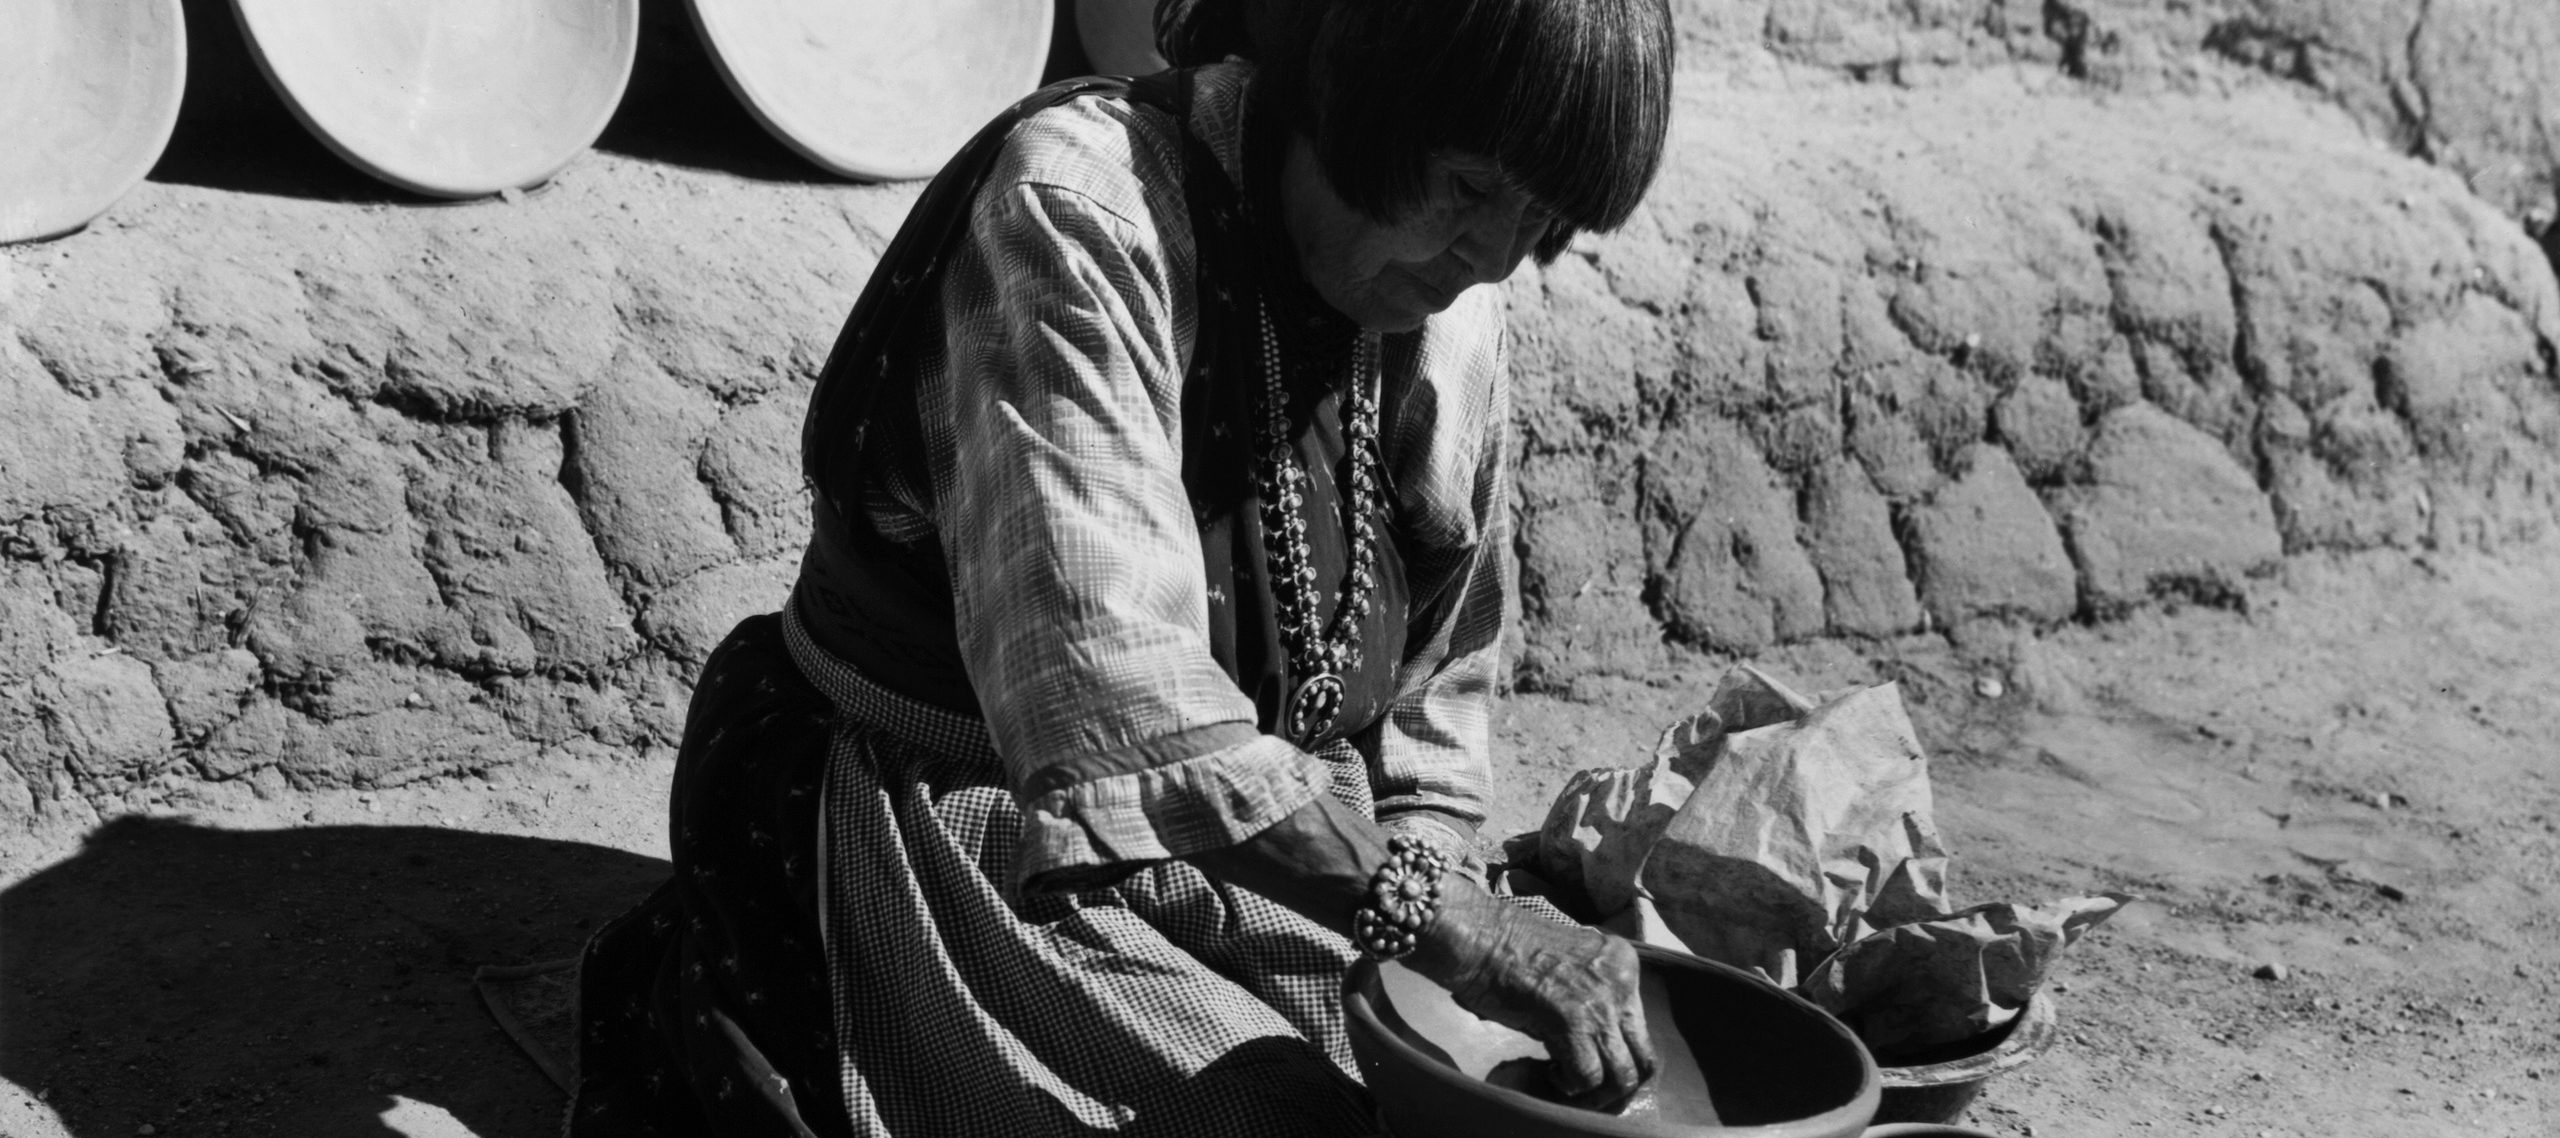 Black and white photograph of woman with medium skin tone making pottery.